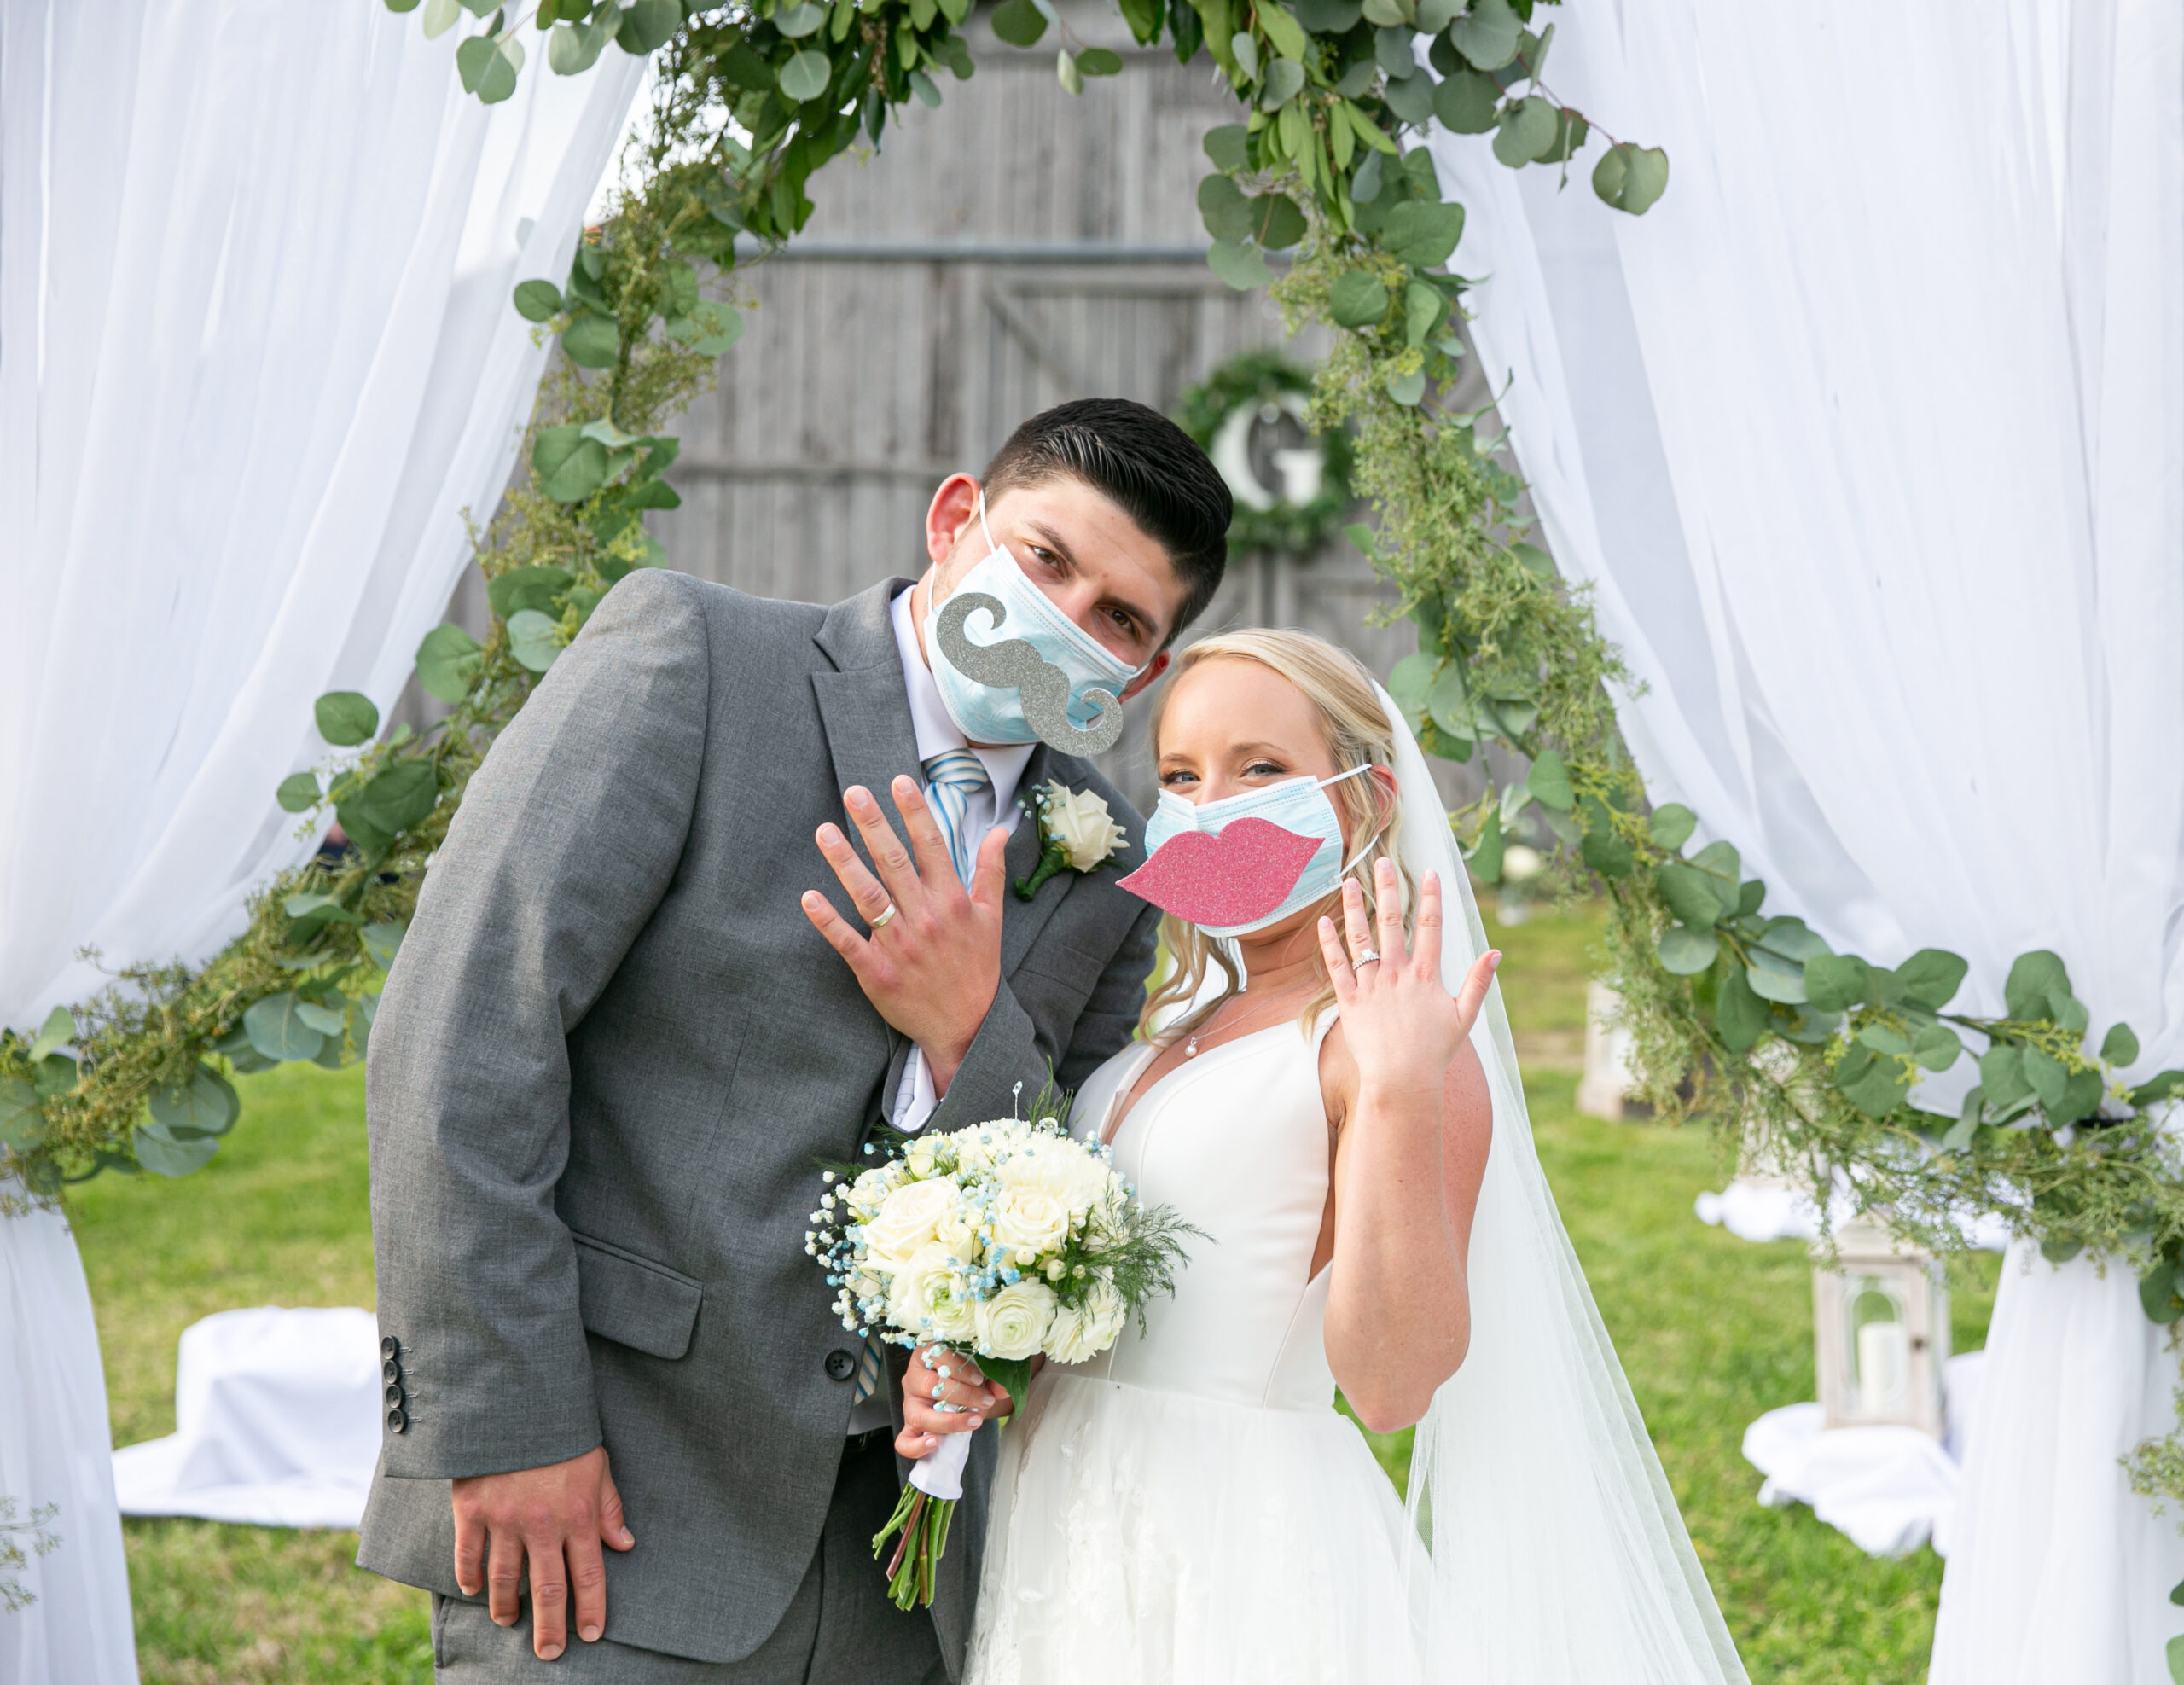 COVID bride and groom poses underneath an arbor of white drapery decorated with a green garland. The bride and groom show off their wedding rings. The groom is wearing a gray suit with a white shirt and light blue and white striped tie with a light blue medical mask that has a large gray felt mustache attached to the front. The bride is wearing a light blue medical mask that has a large pink felt set of lips attached to the front. The bride is holding a bouquet of white and blue flowers. 